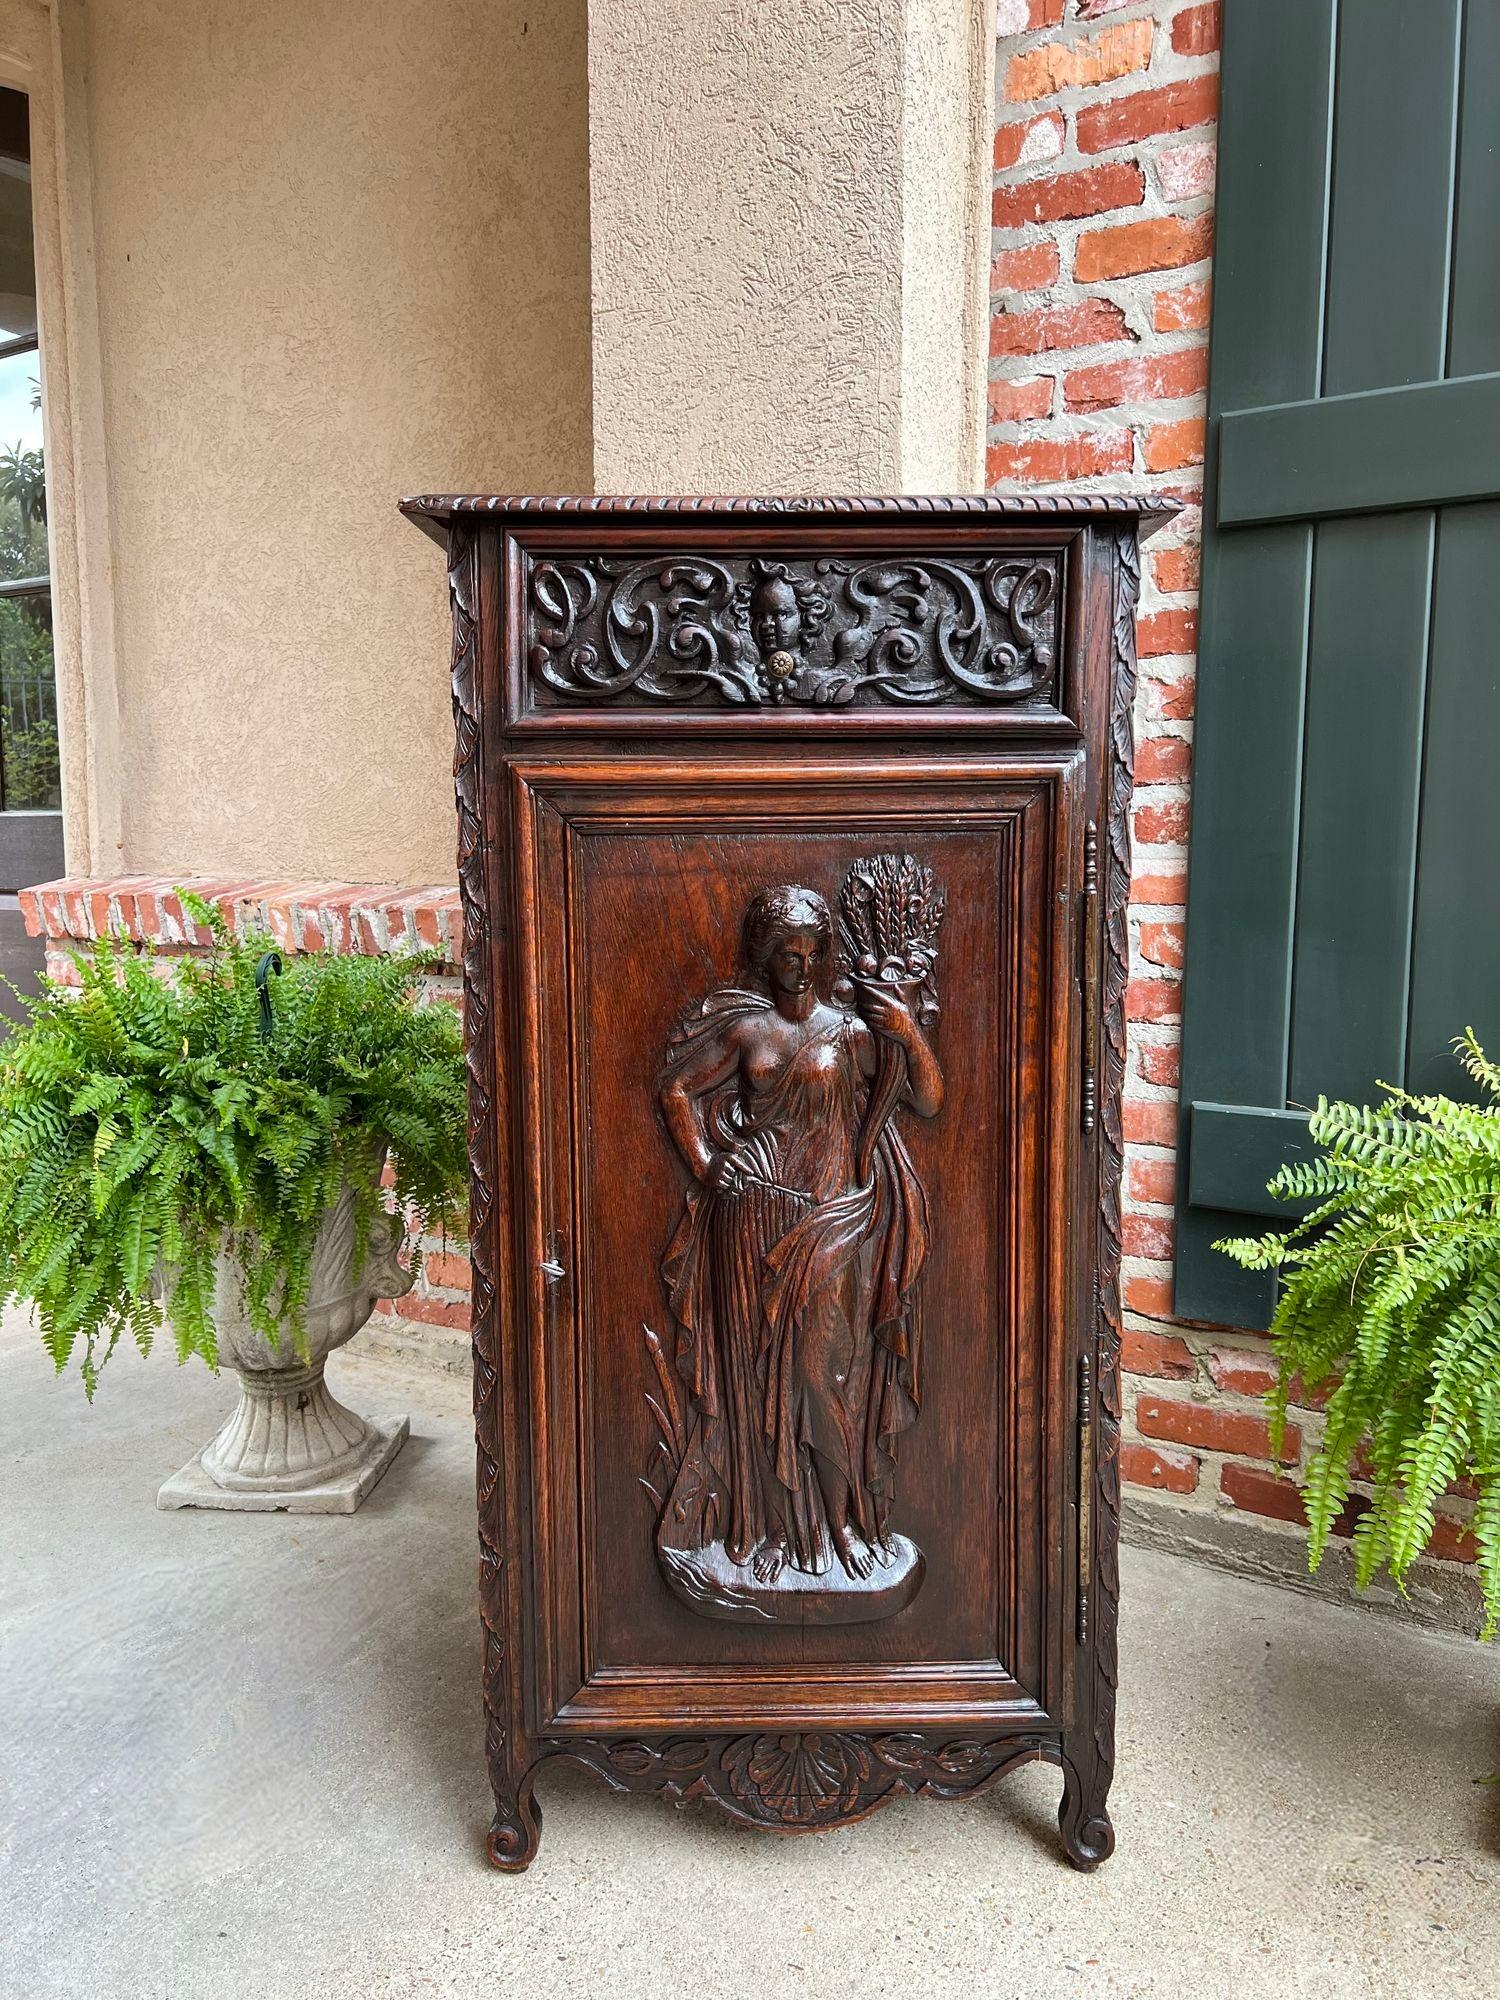 Antique French Cabinet Carved Oak Demeter Harvest Cornucopia Greek Goddess.

Direct from France, a beautifully hand carved 19th century French “confiturier’ cabinet, which is an extremely versatile size, perfect for placement in any room, and a